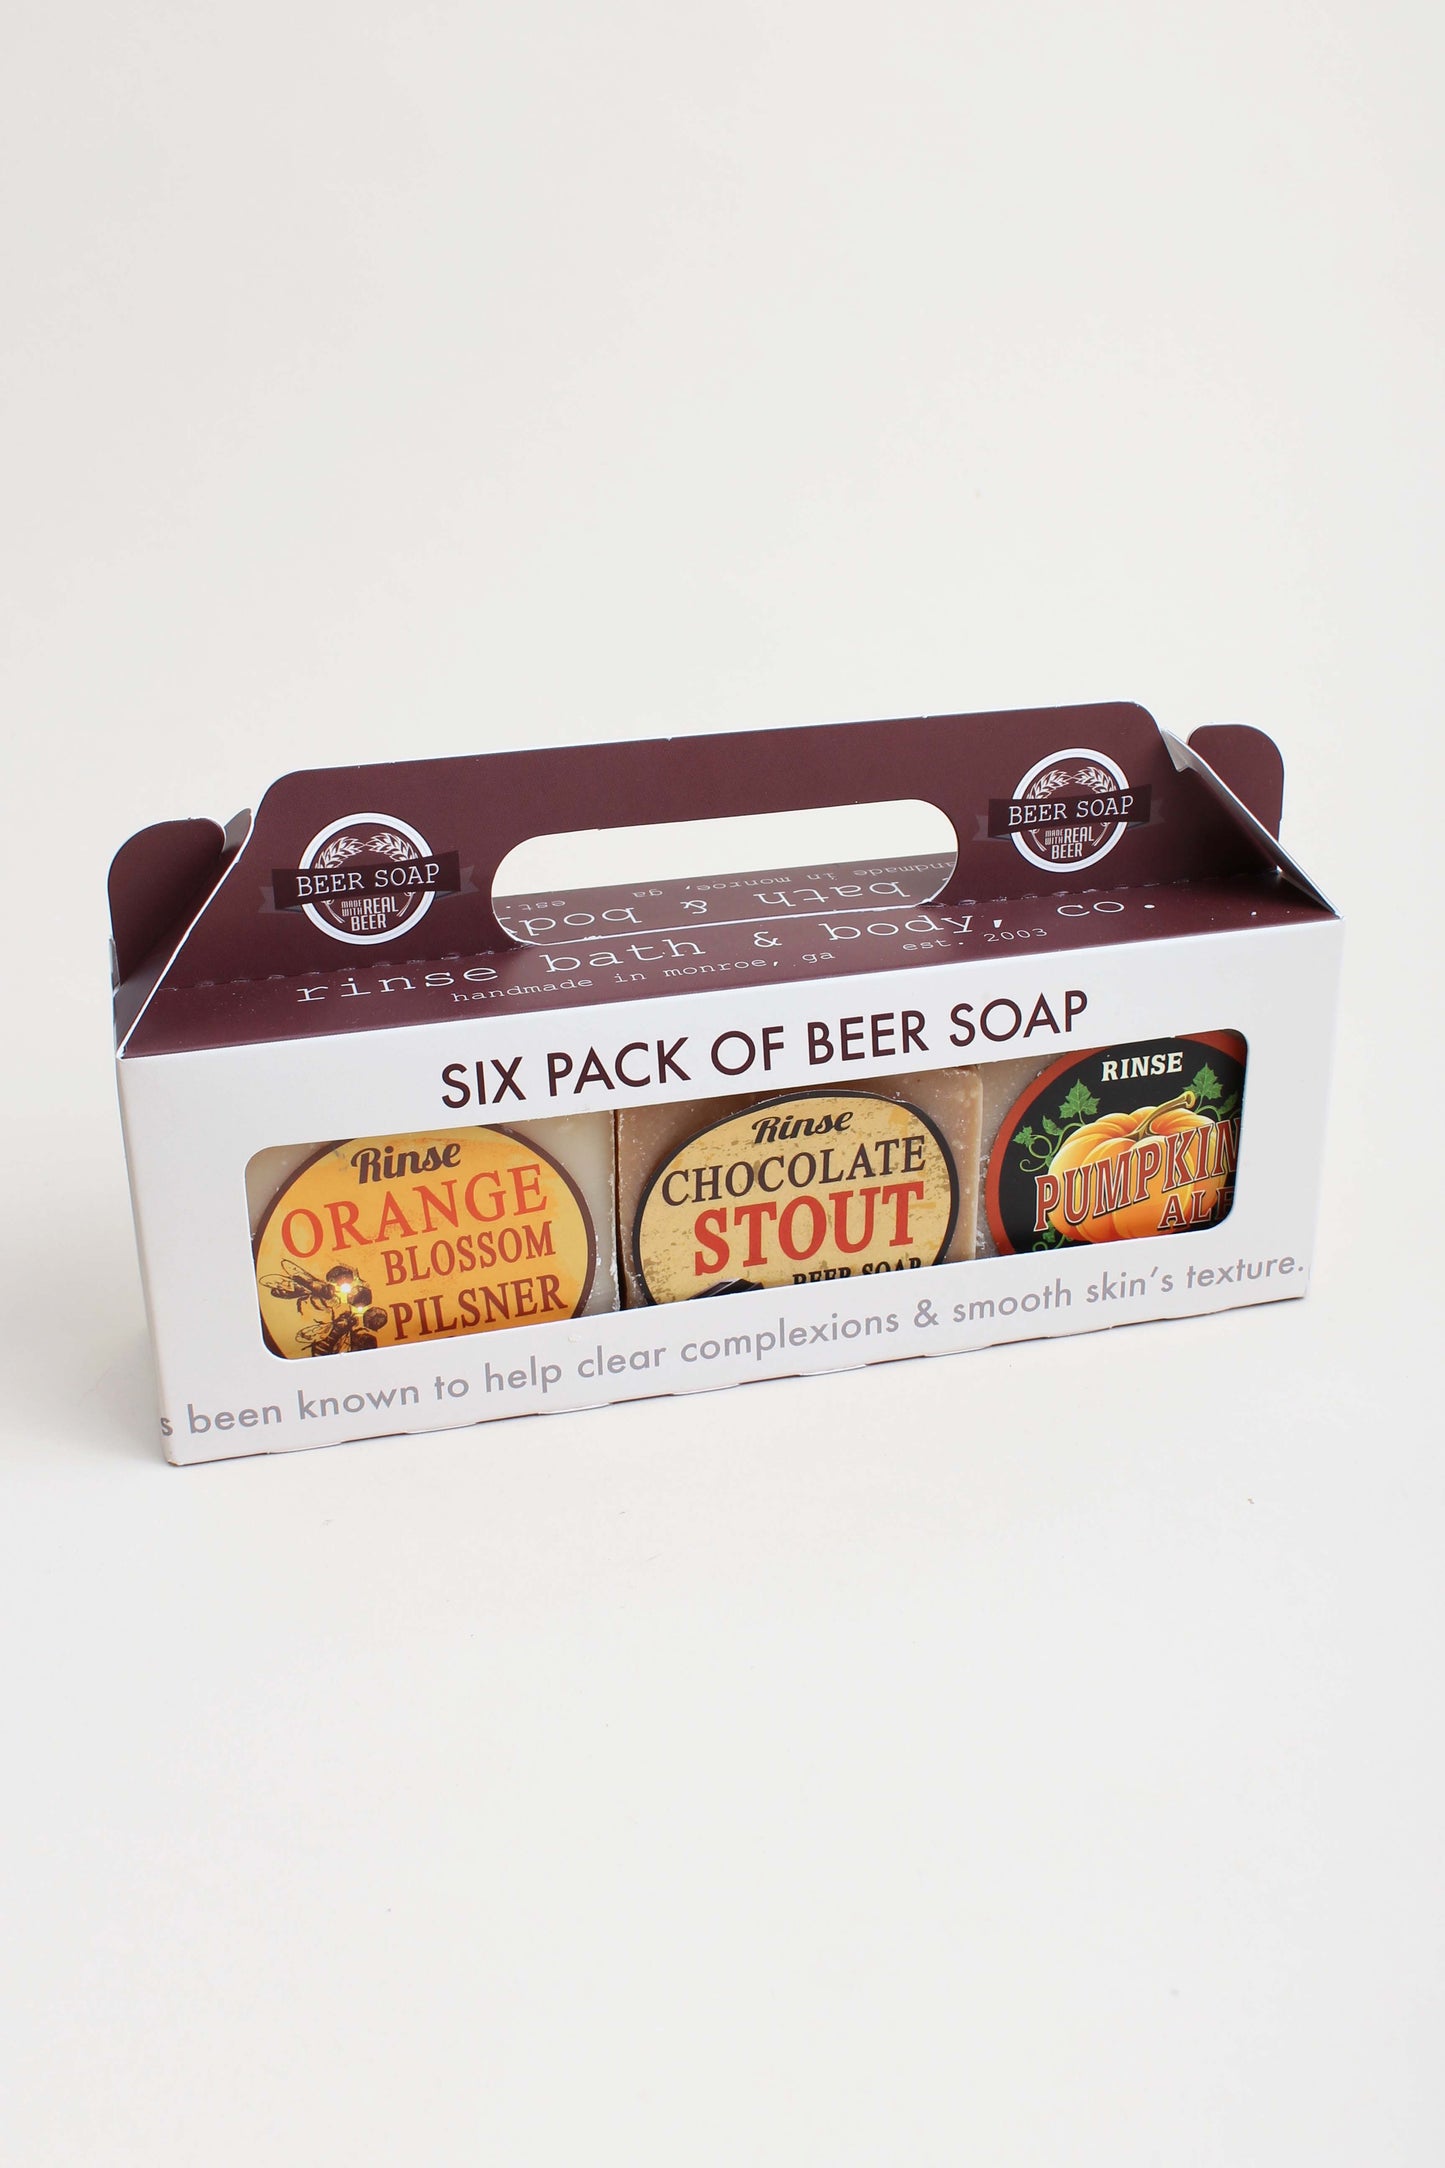 6 Pack of Natural Beer Soap